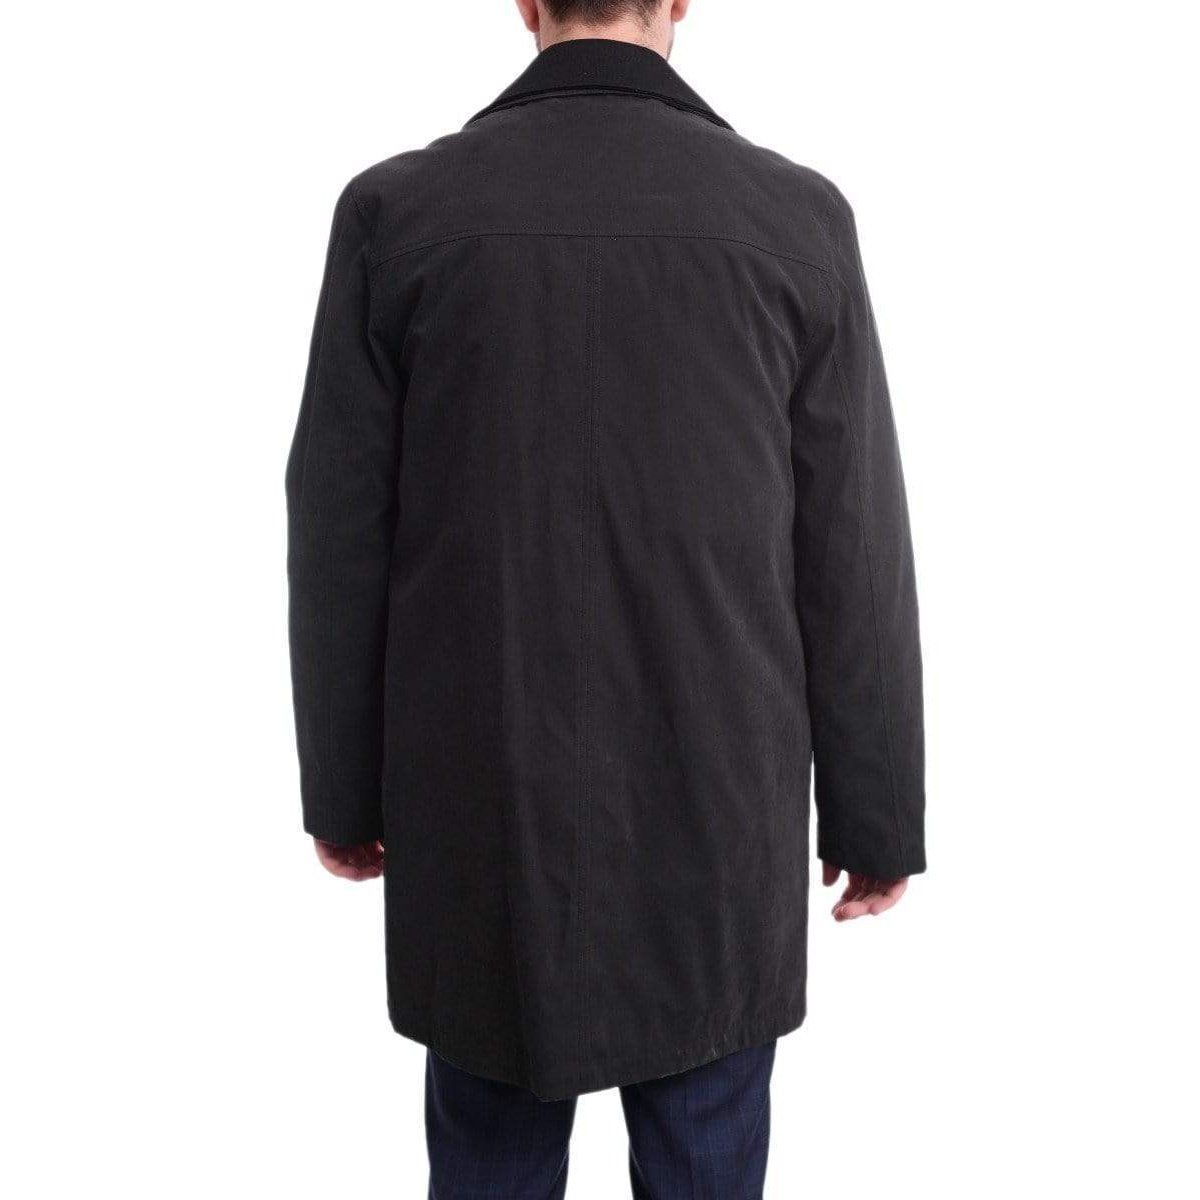 Cianni Cellini Dress Coats Men's Rain-proof Iconic Black Trench Coat Jacket With Removable Liner